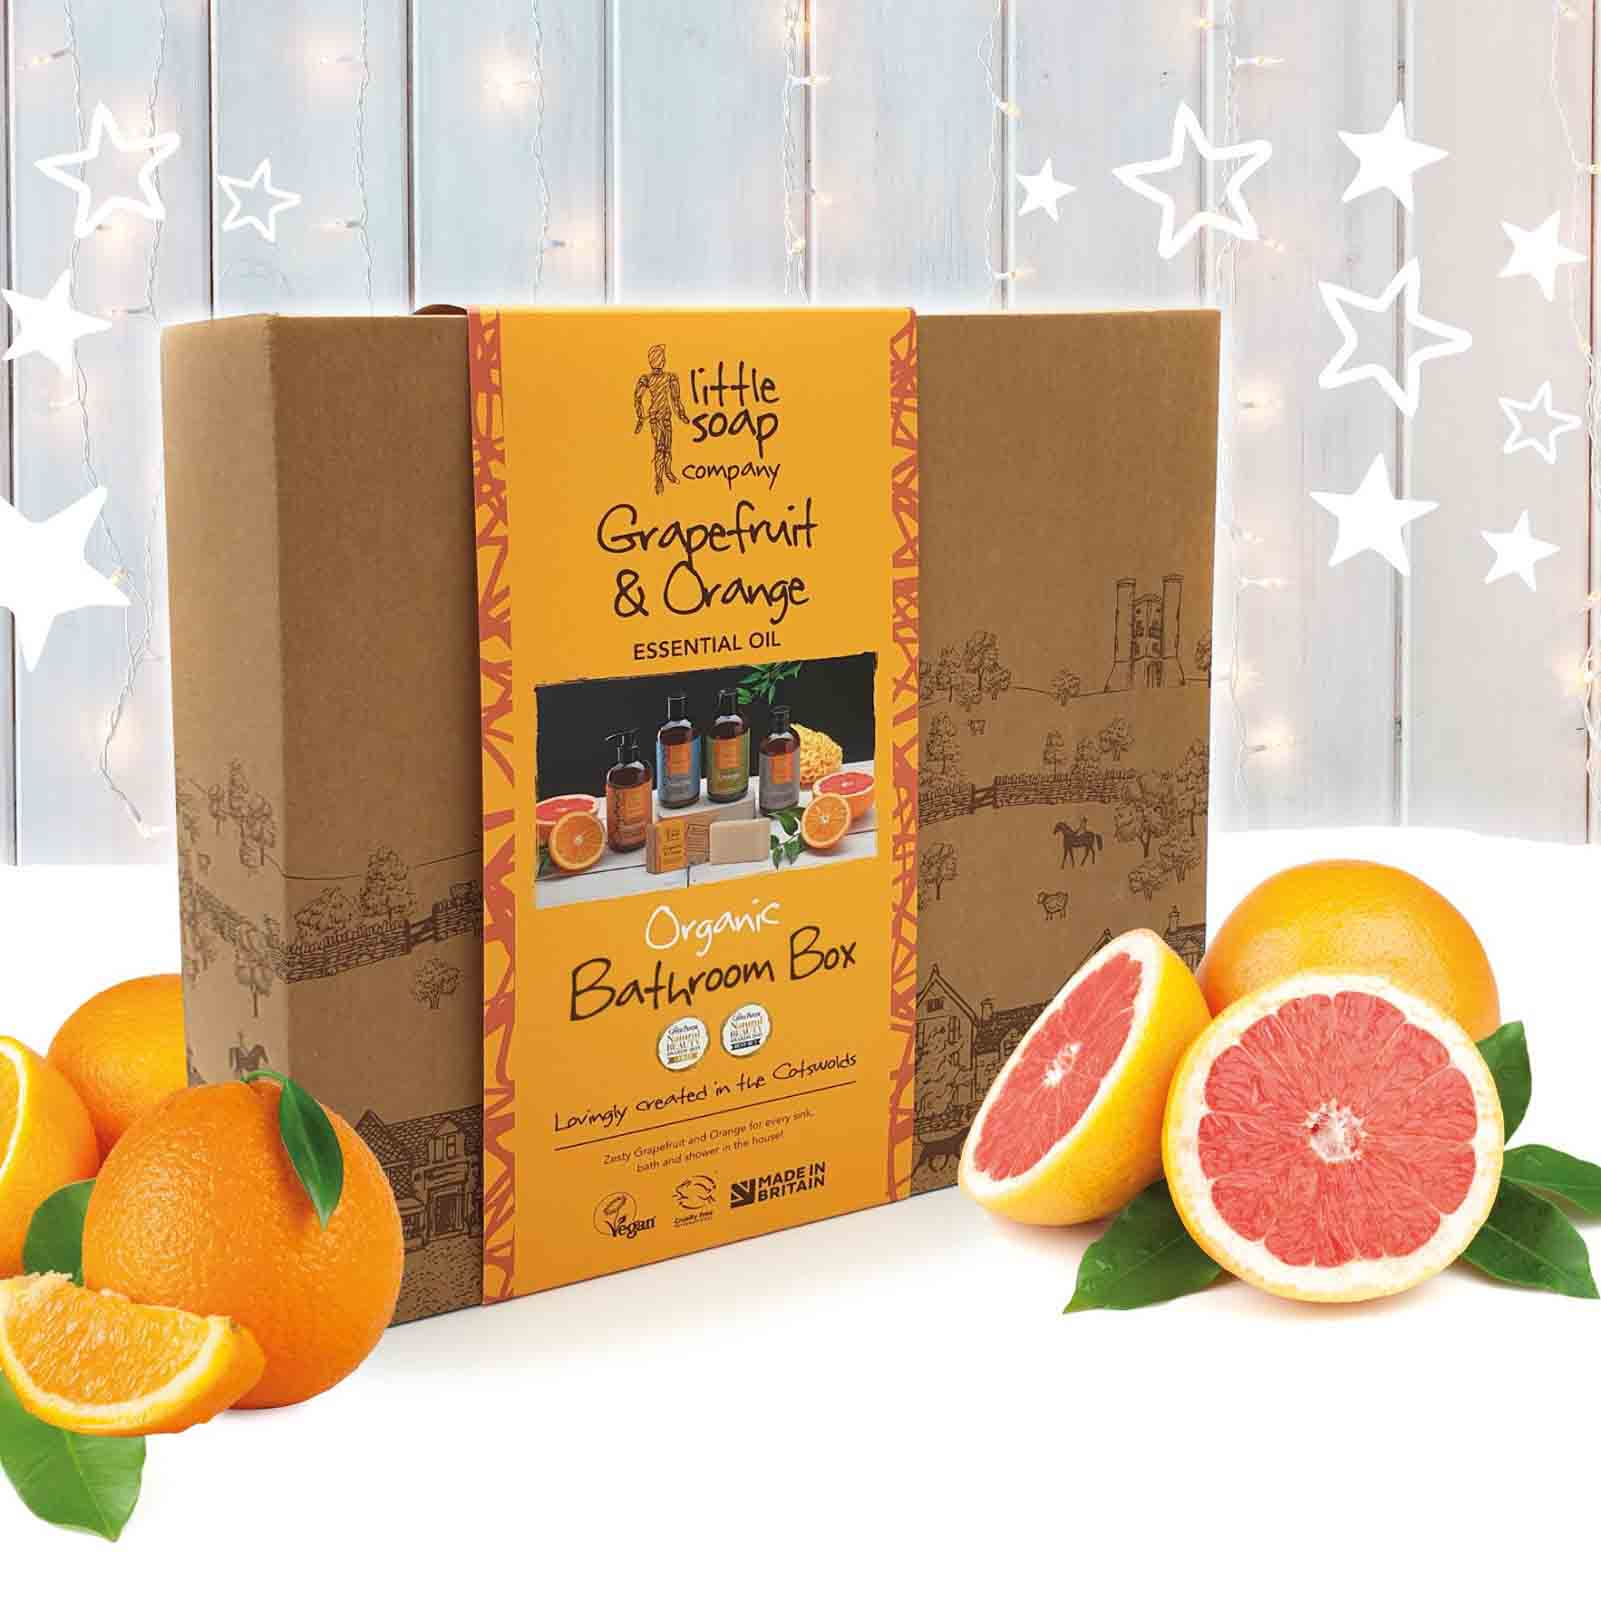 Little Soap Company Grapefruit and Orange gift set. I Pledge Indie Christmas support the UK economy. Shop independent this Christmas. Find independent online shops at Love Our Shops UK shopping directory.